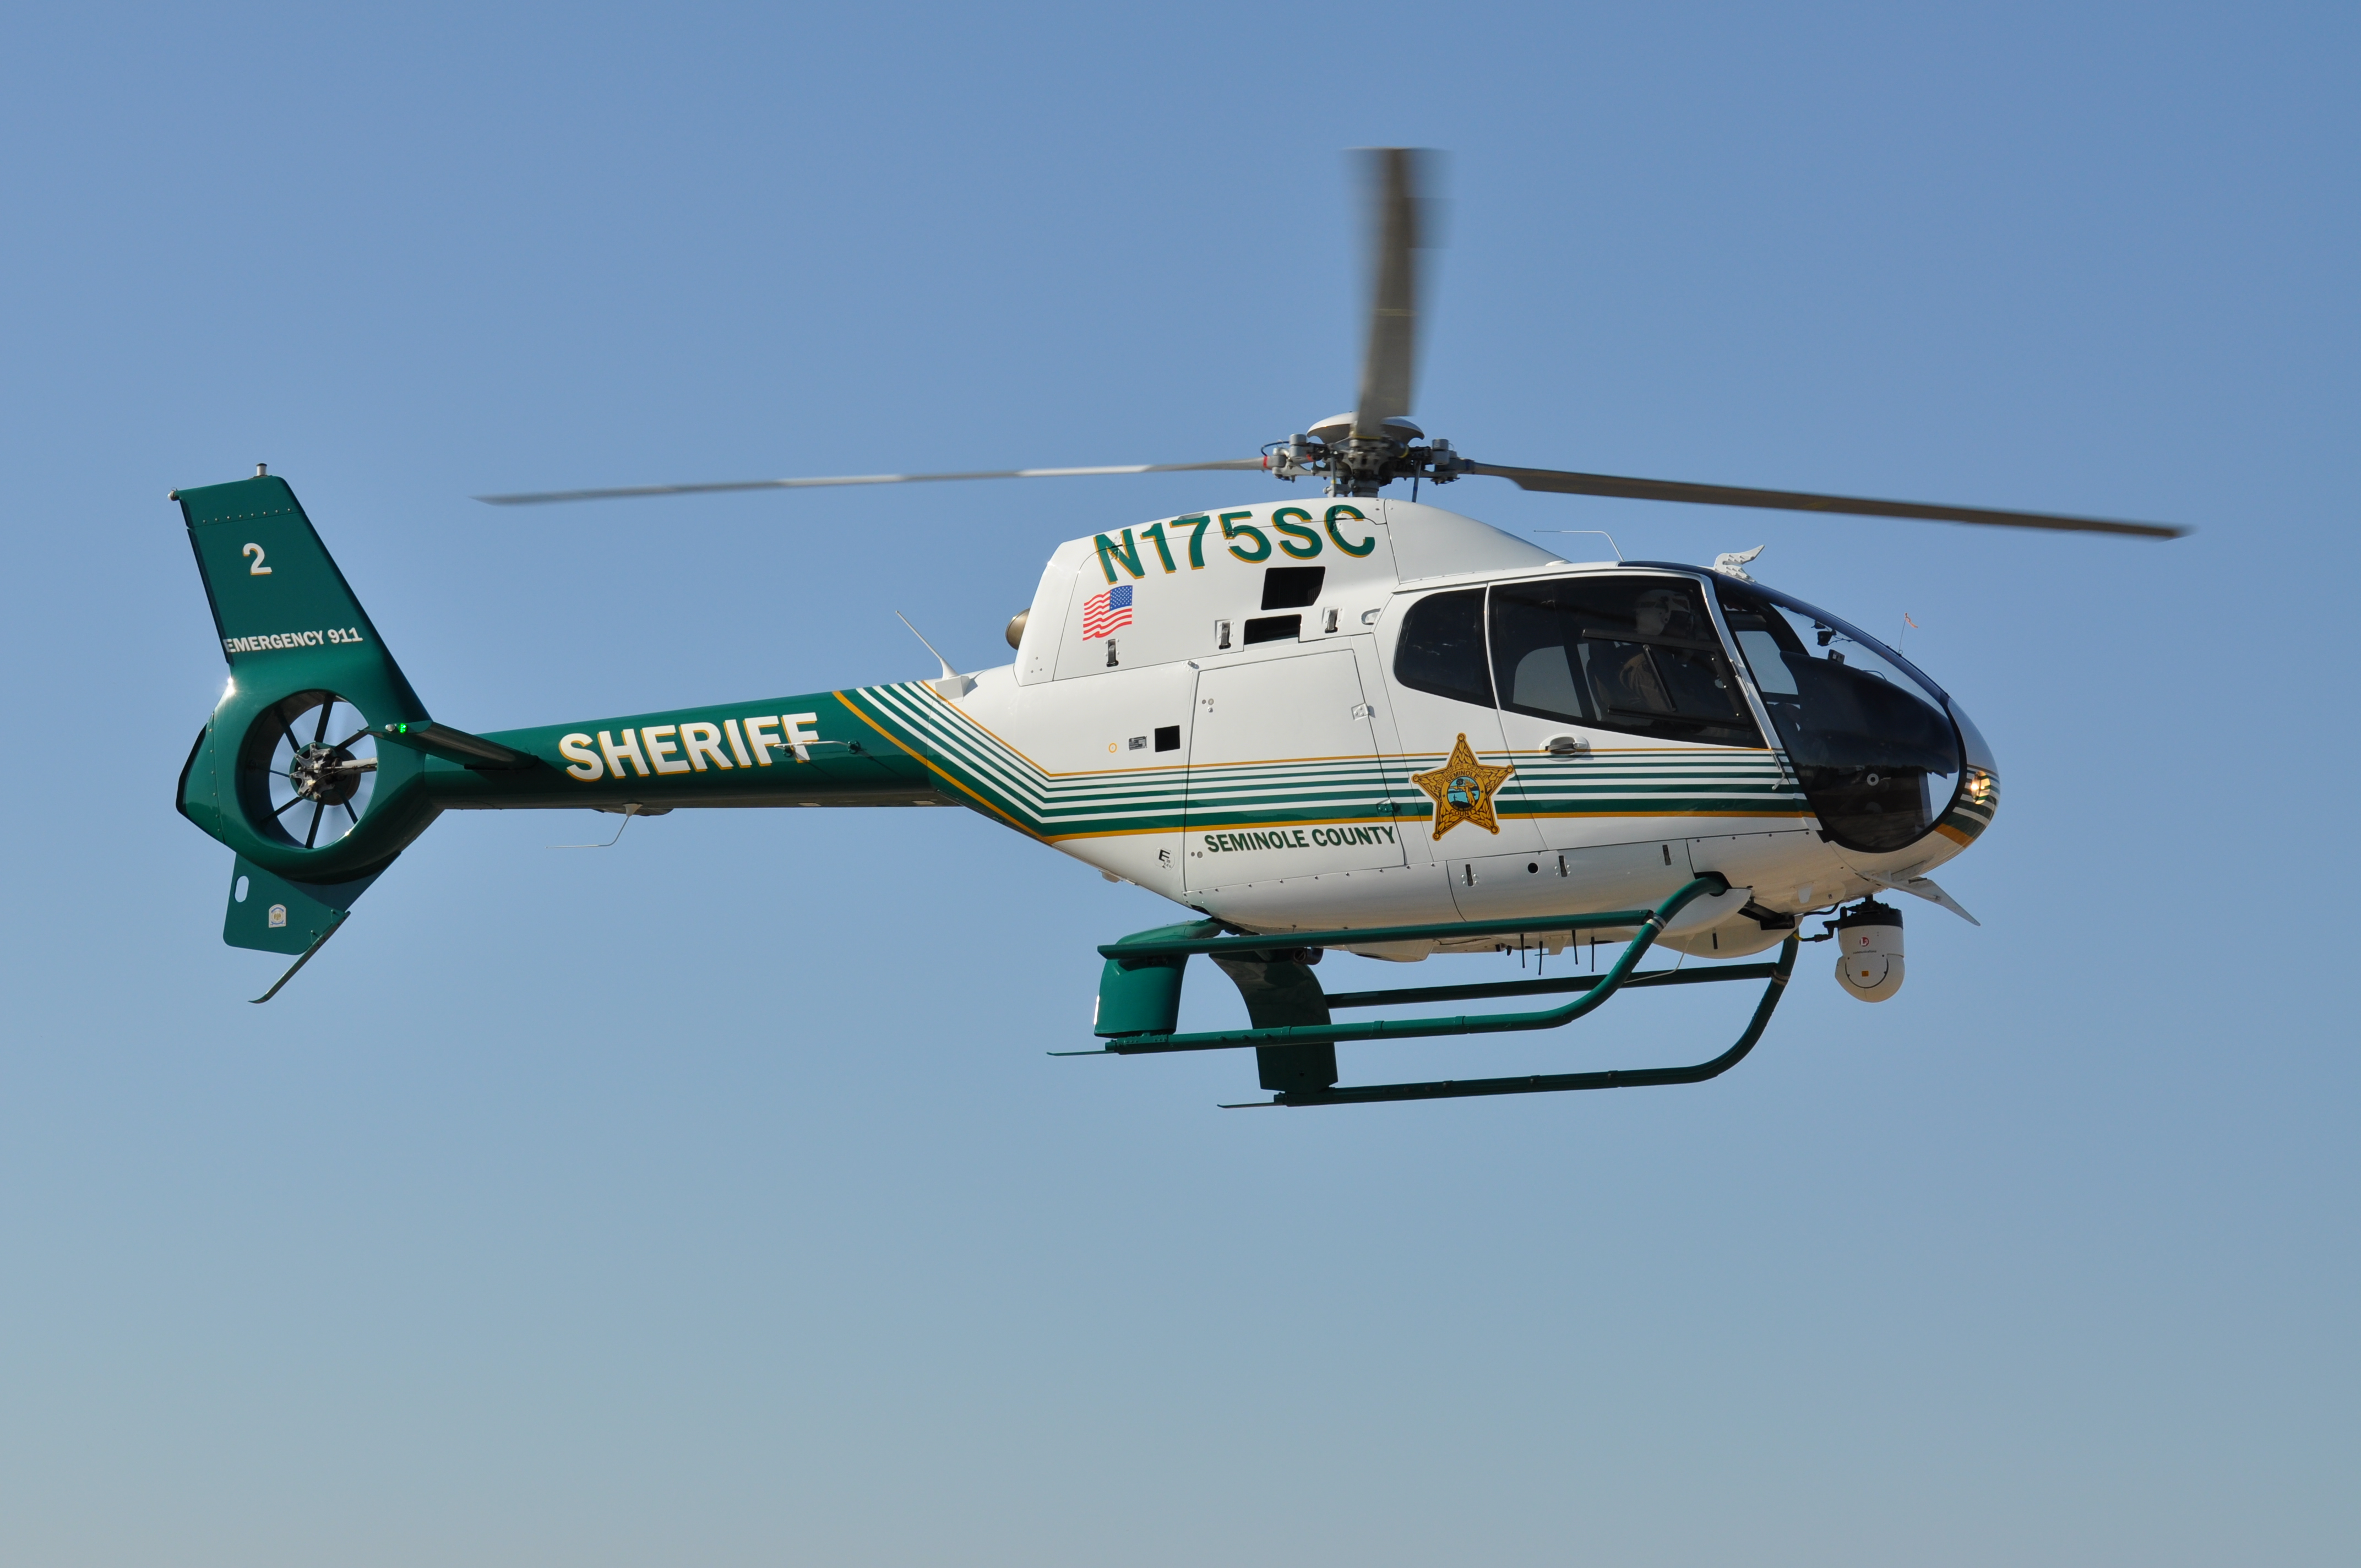 file-scso-helicopter-alert-jpg-wikipedia-the-free-encyclopedia